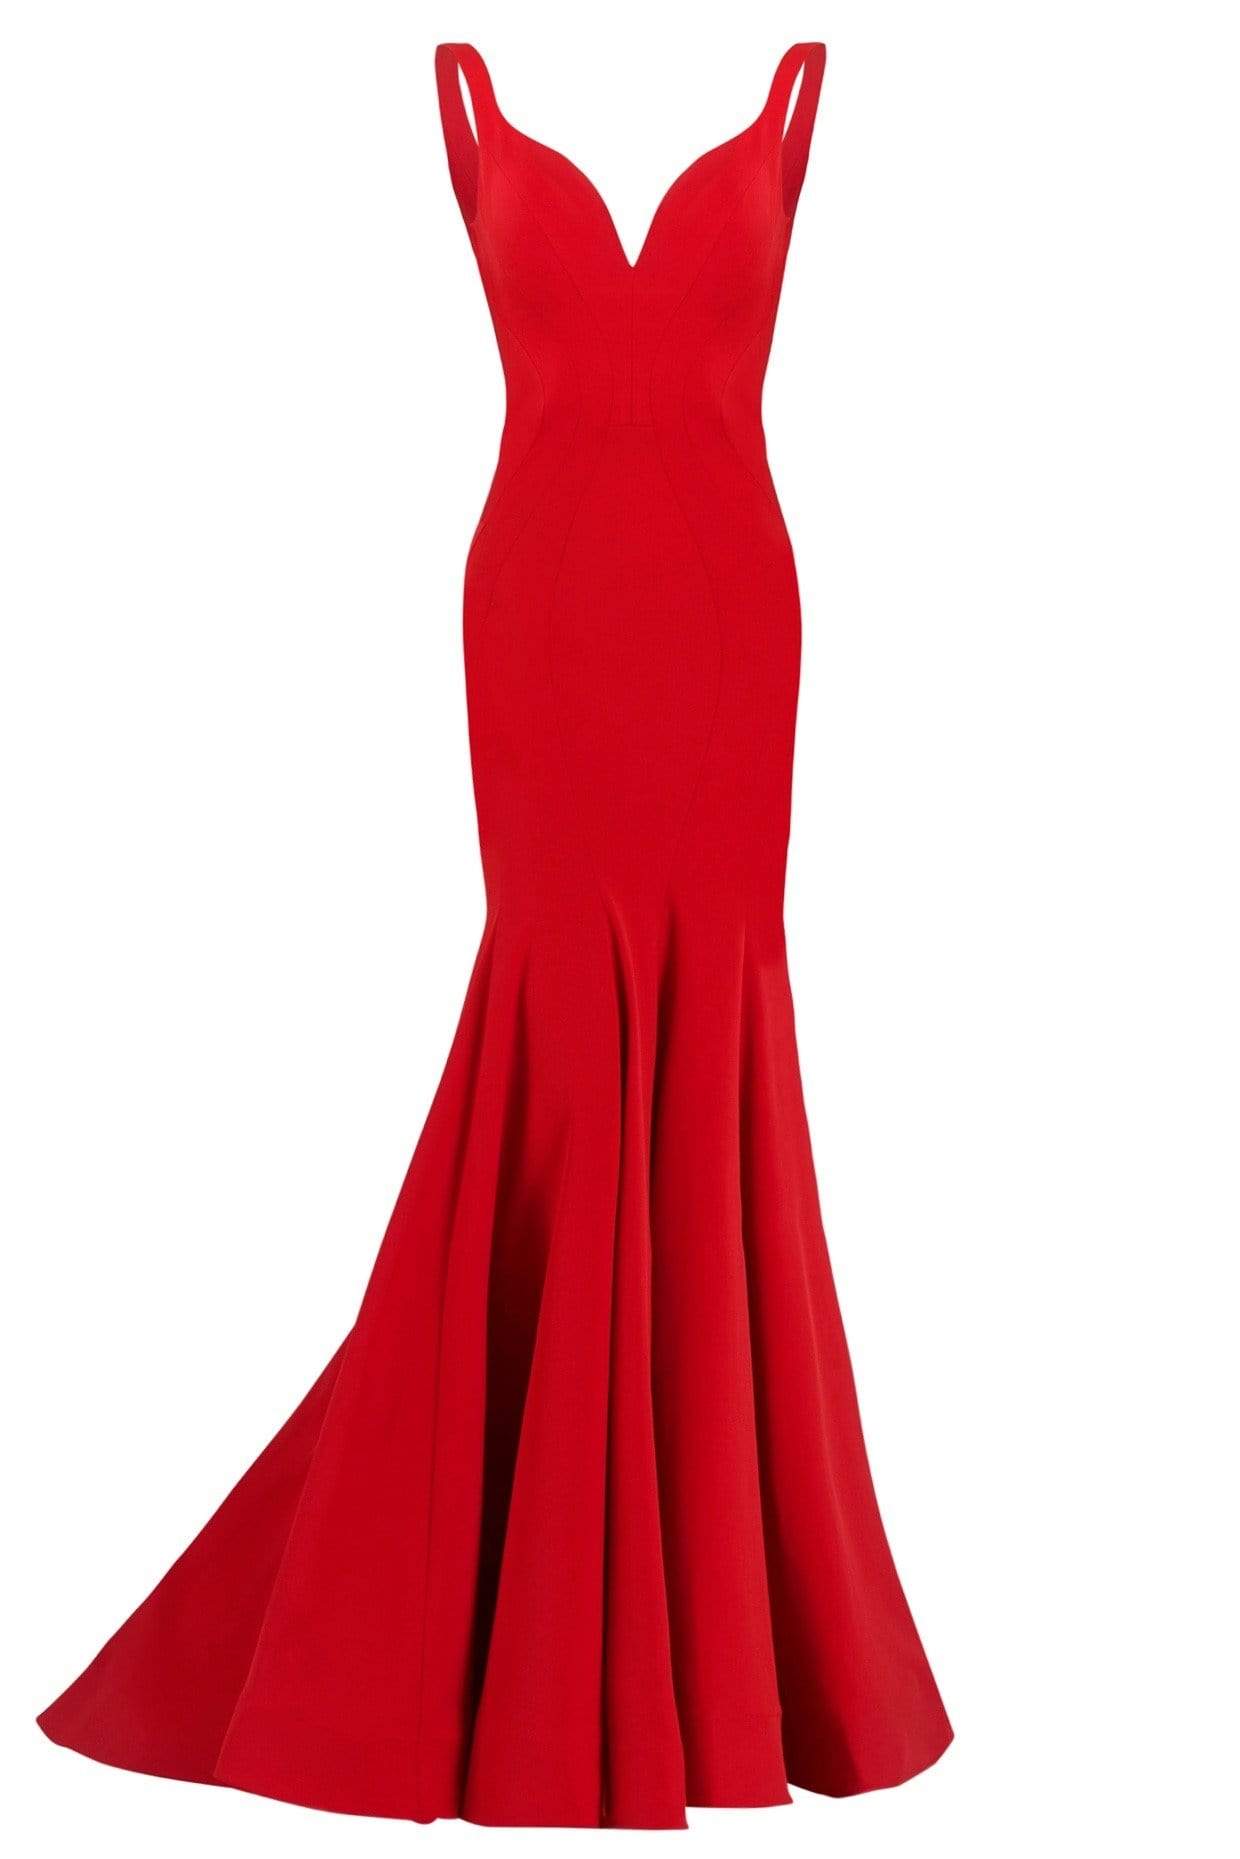 Janique - JQ1820 Sleeveless Vibrant Crepe Mermaid Gown Special Occasion Dress 0 / Red